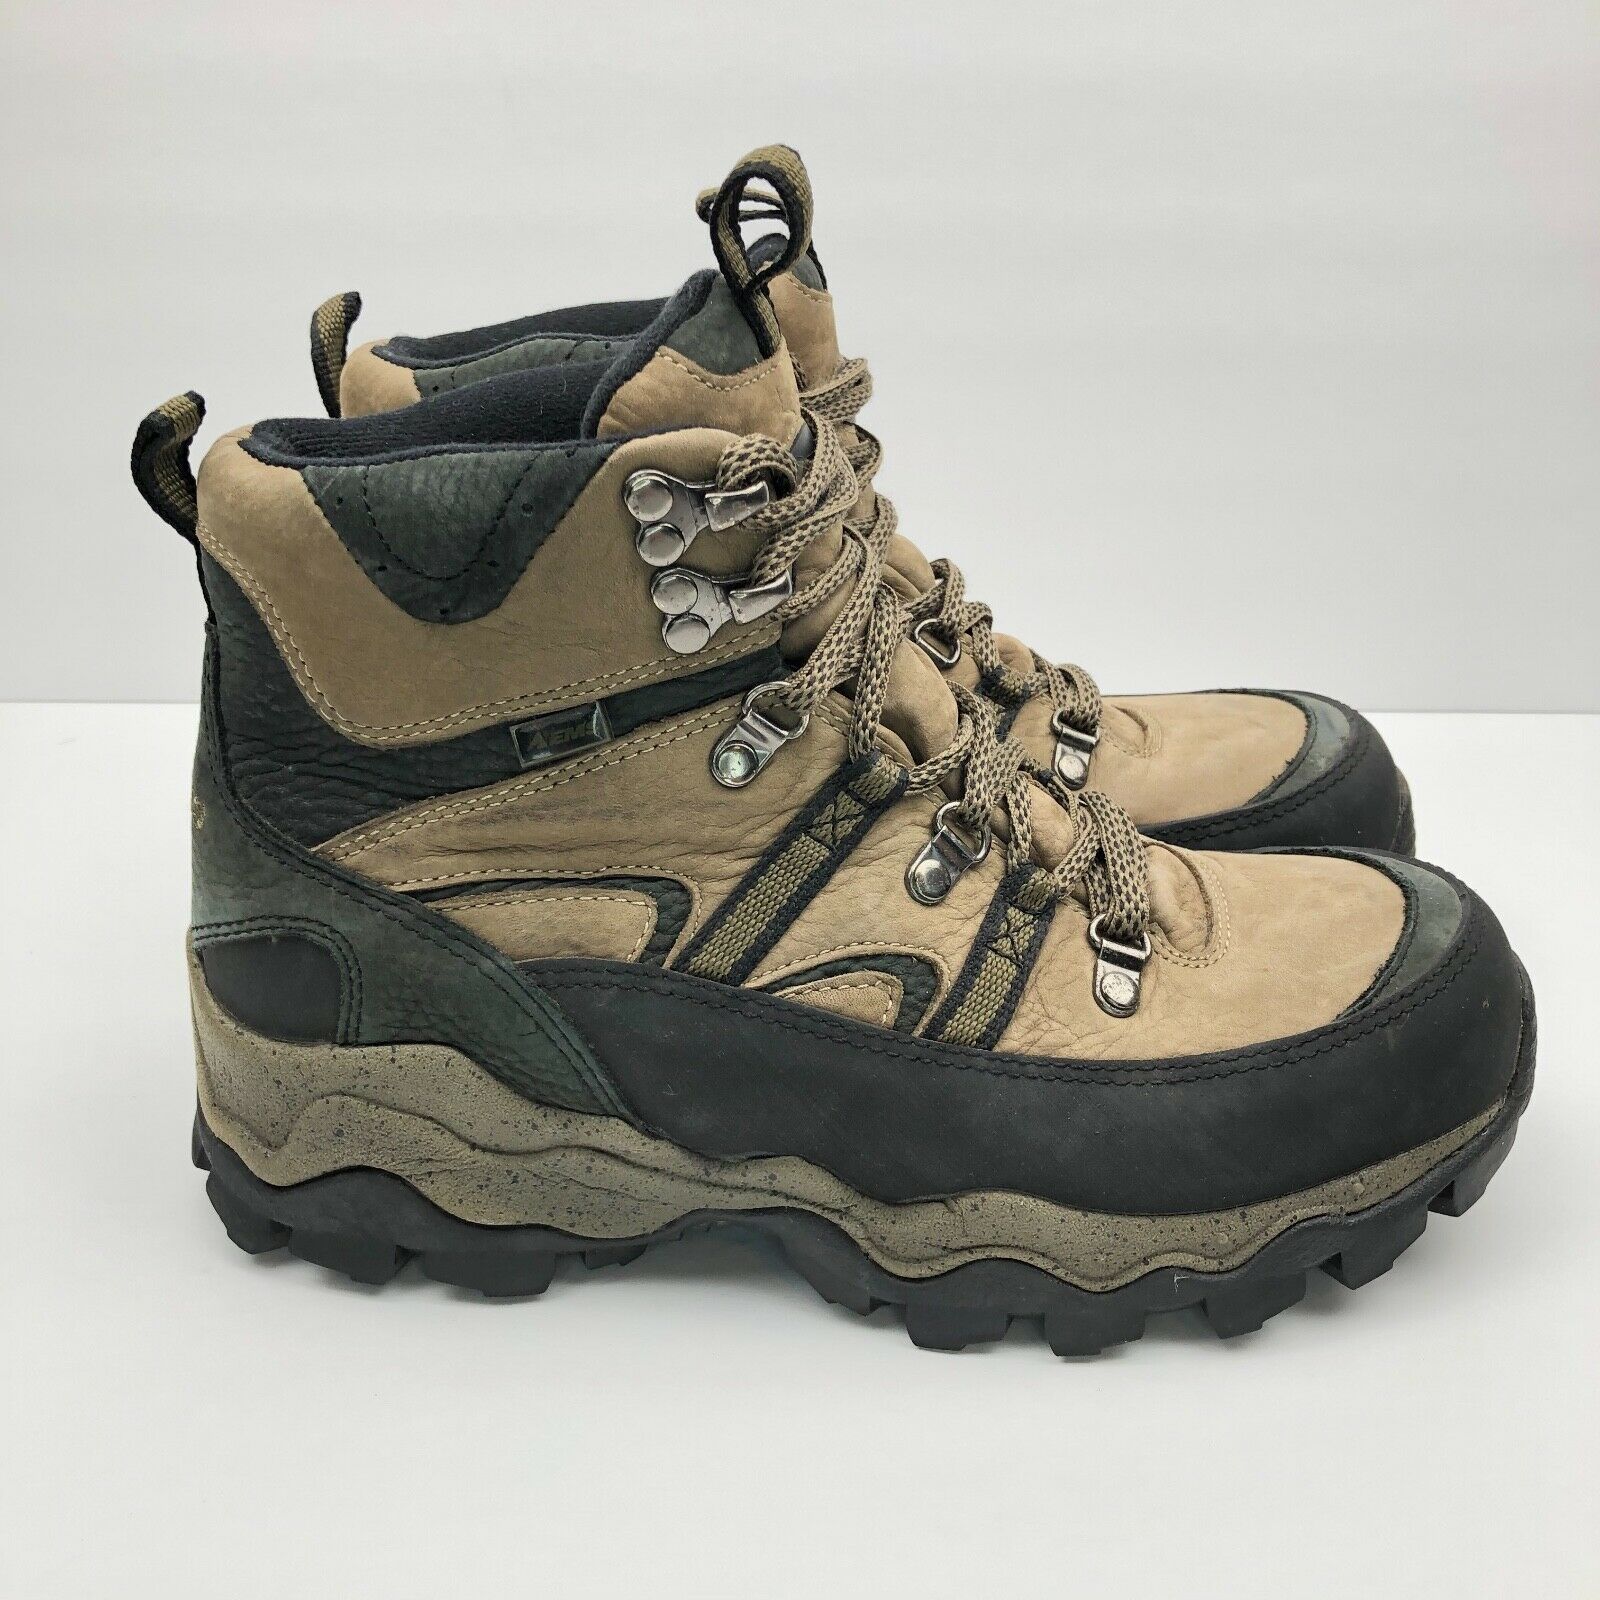 EMS Eastern Mountain Sports Hiking Boots Cornice Shoes Insulated Mens Size 8